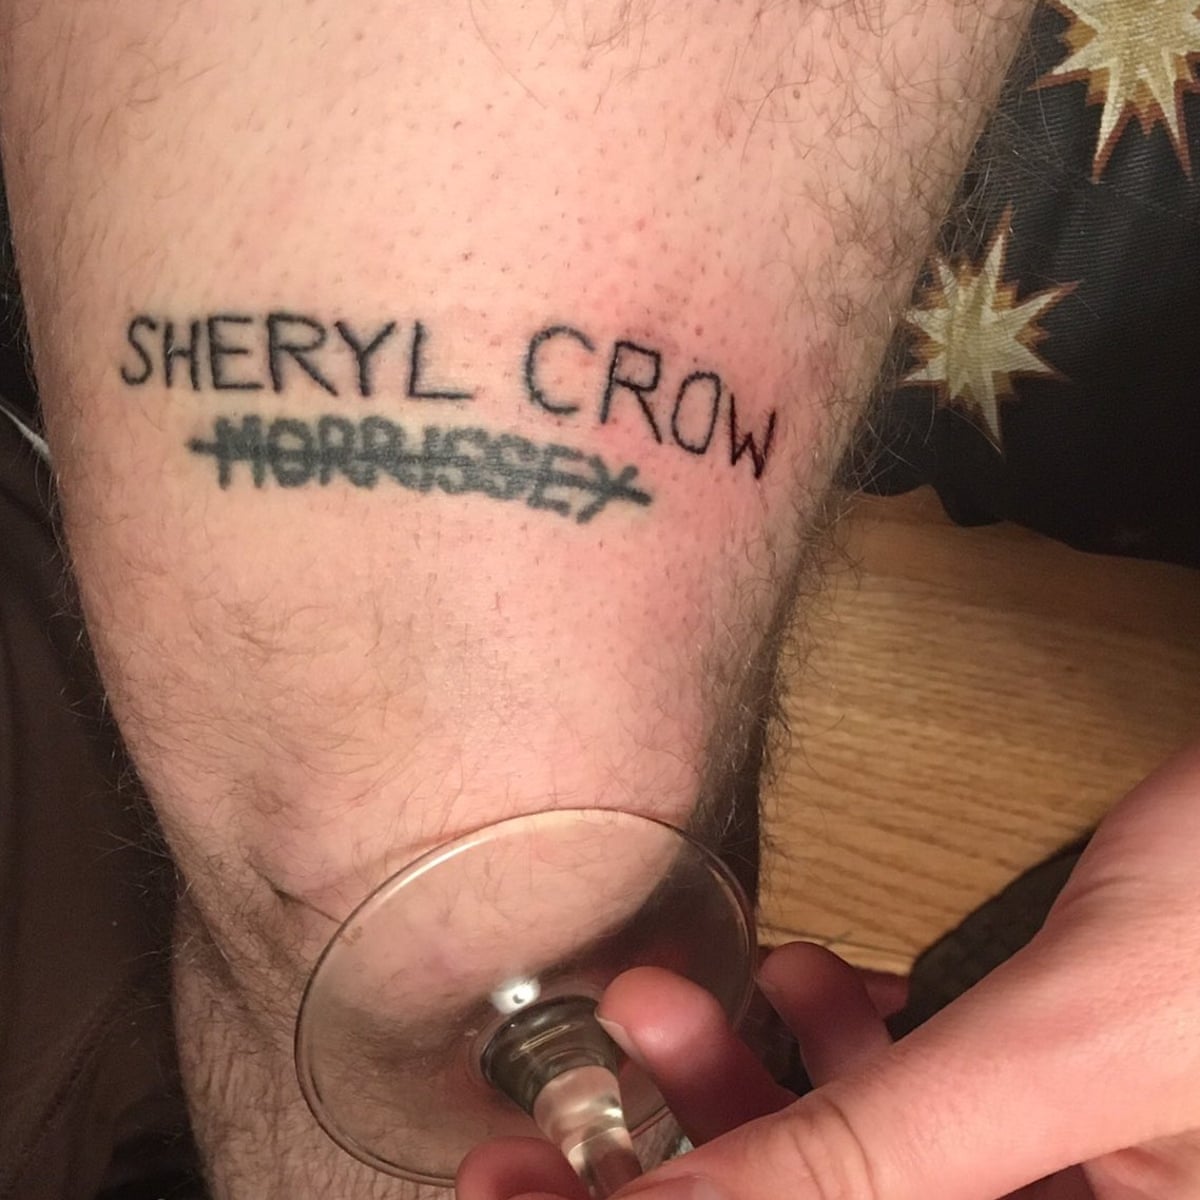 Why one fan covered up his Morrissey tattoo with Sheryl Crow | Tattoos |  The Guardian